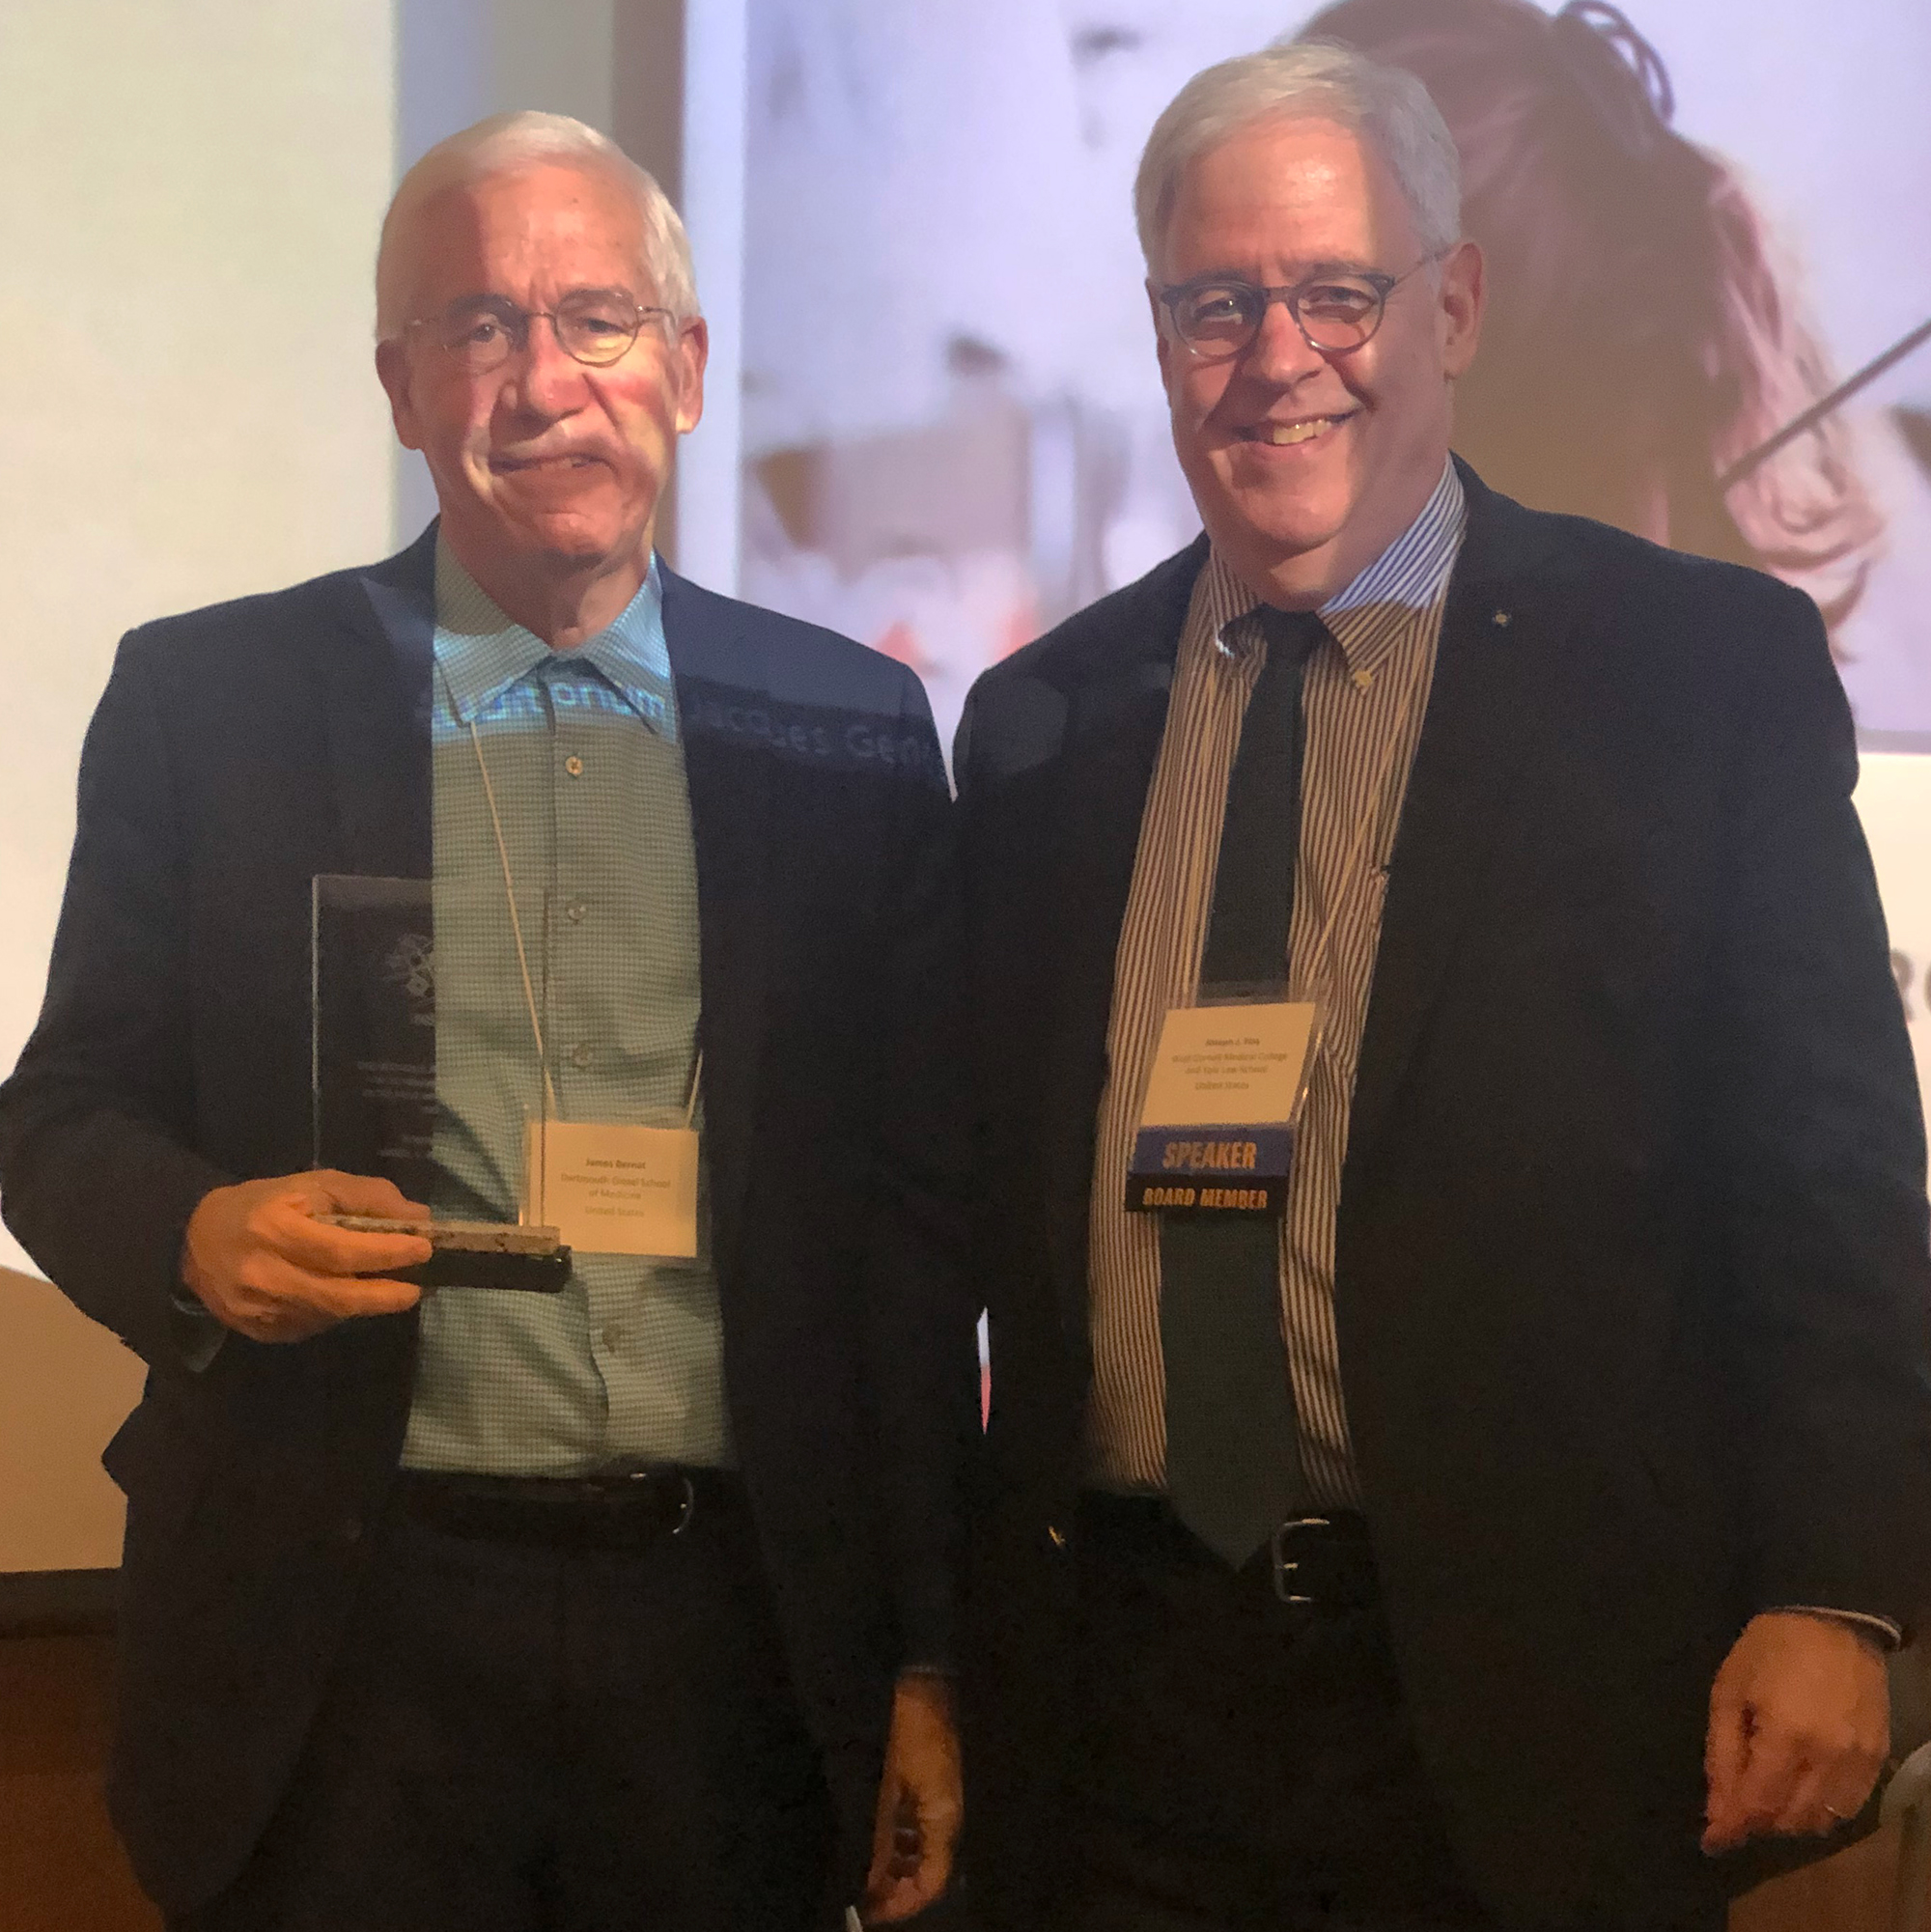 Dr. James Bernat holding an award and Joseph J. Fins posing for a photo 2022 INS Annual Meeting in Montreal, Canada;